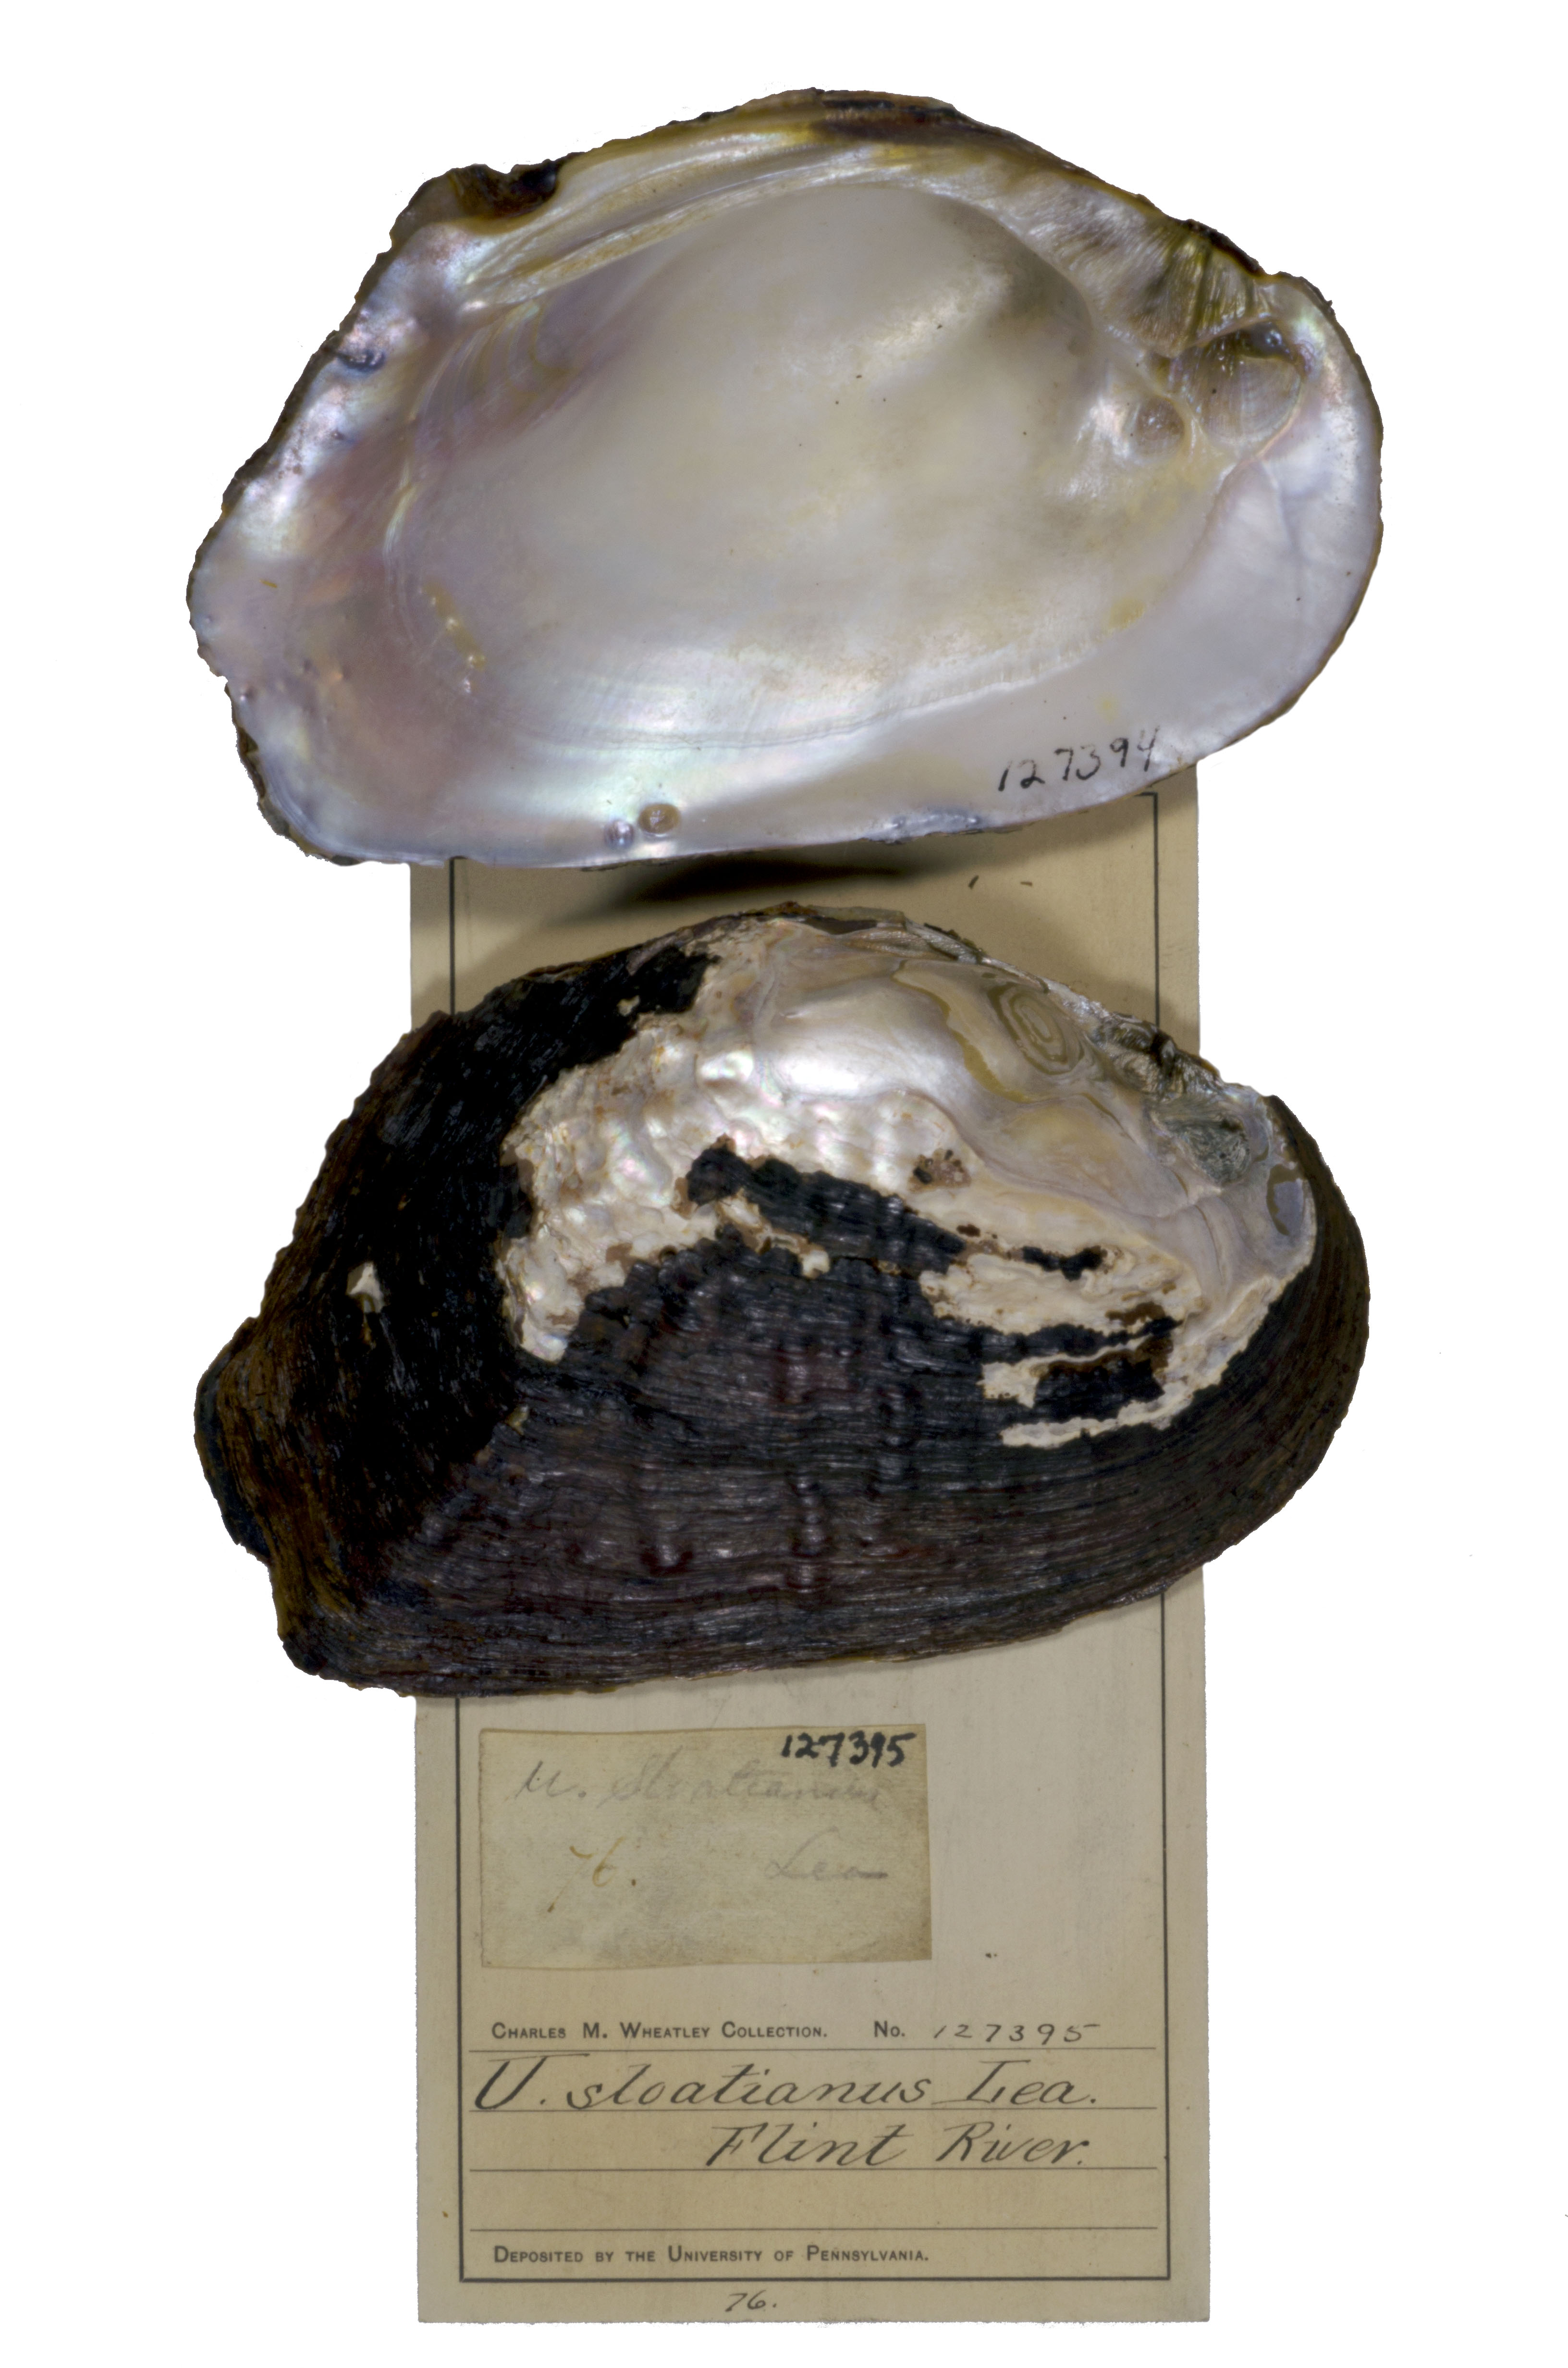 Black and white mussel shell with label